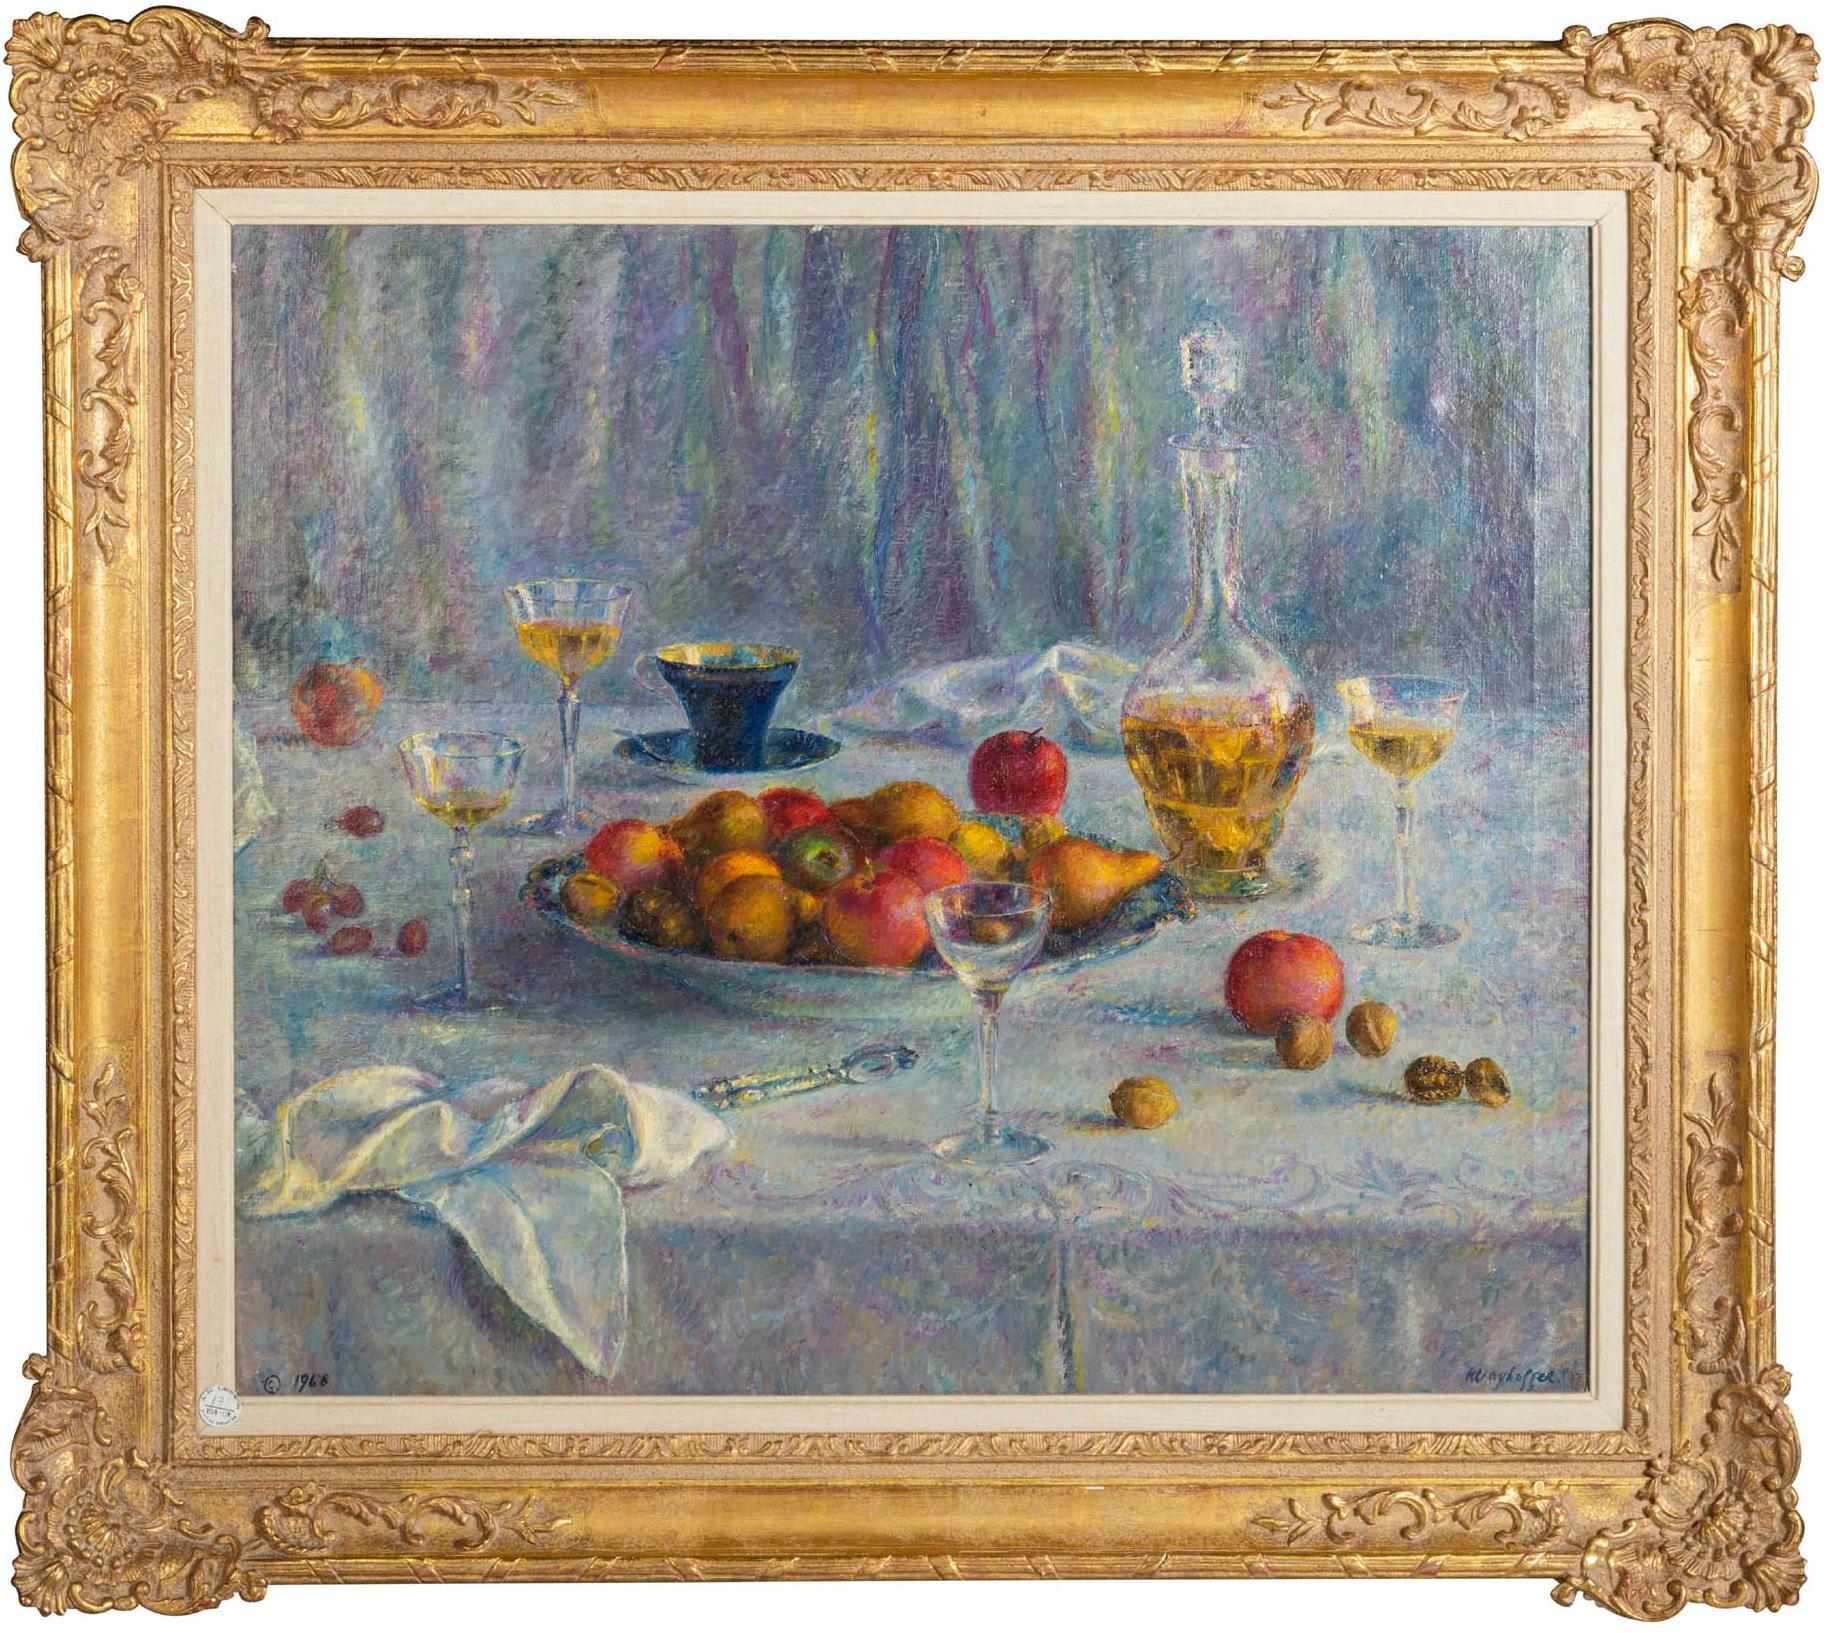 Clara Klinghoffer (1900-1972)
Still life of fruit set upon a table.
Oil on canvas
Signed Klinghoffer, lower right, dated 1969, lower left.
Size with frame
Height 36.5 in. (92.71 cm.)
Width 41.25 in. (104.77 cm.)
Canvas sight size
Height